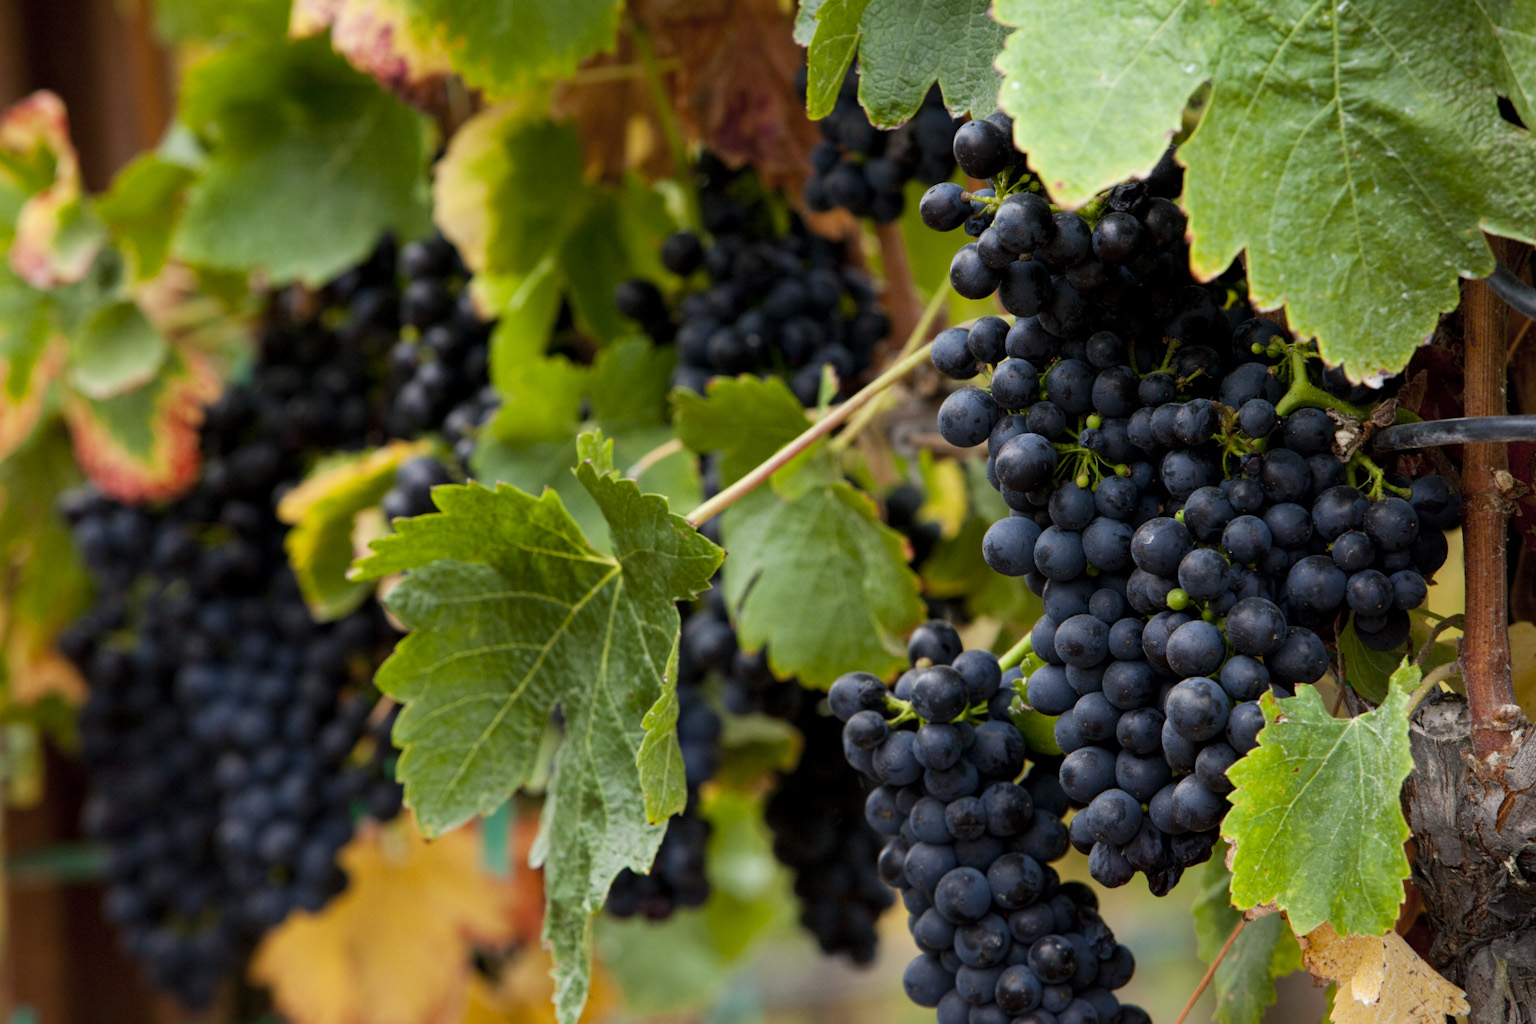 Dark purple grape clusters hanging on vine with green leaves